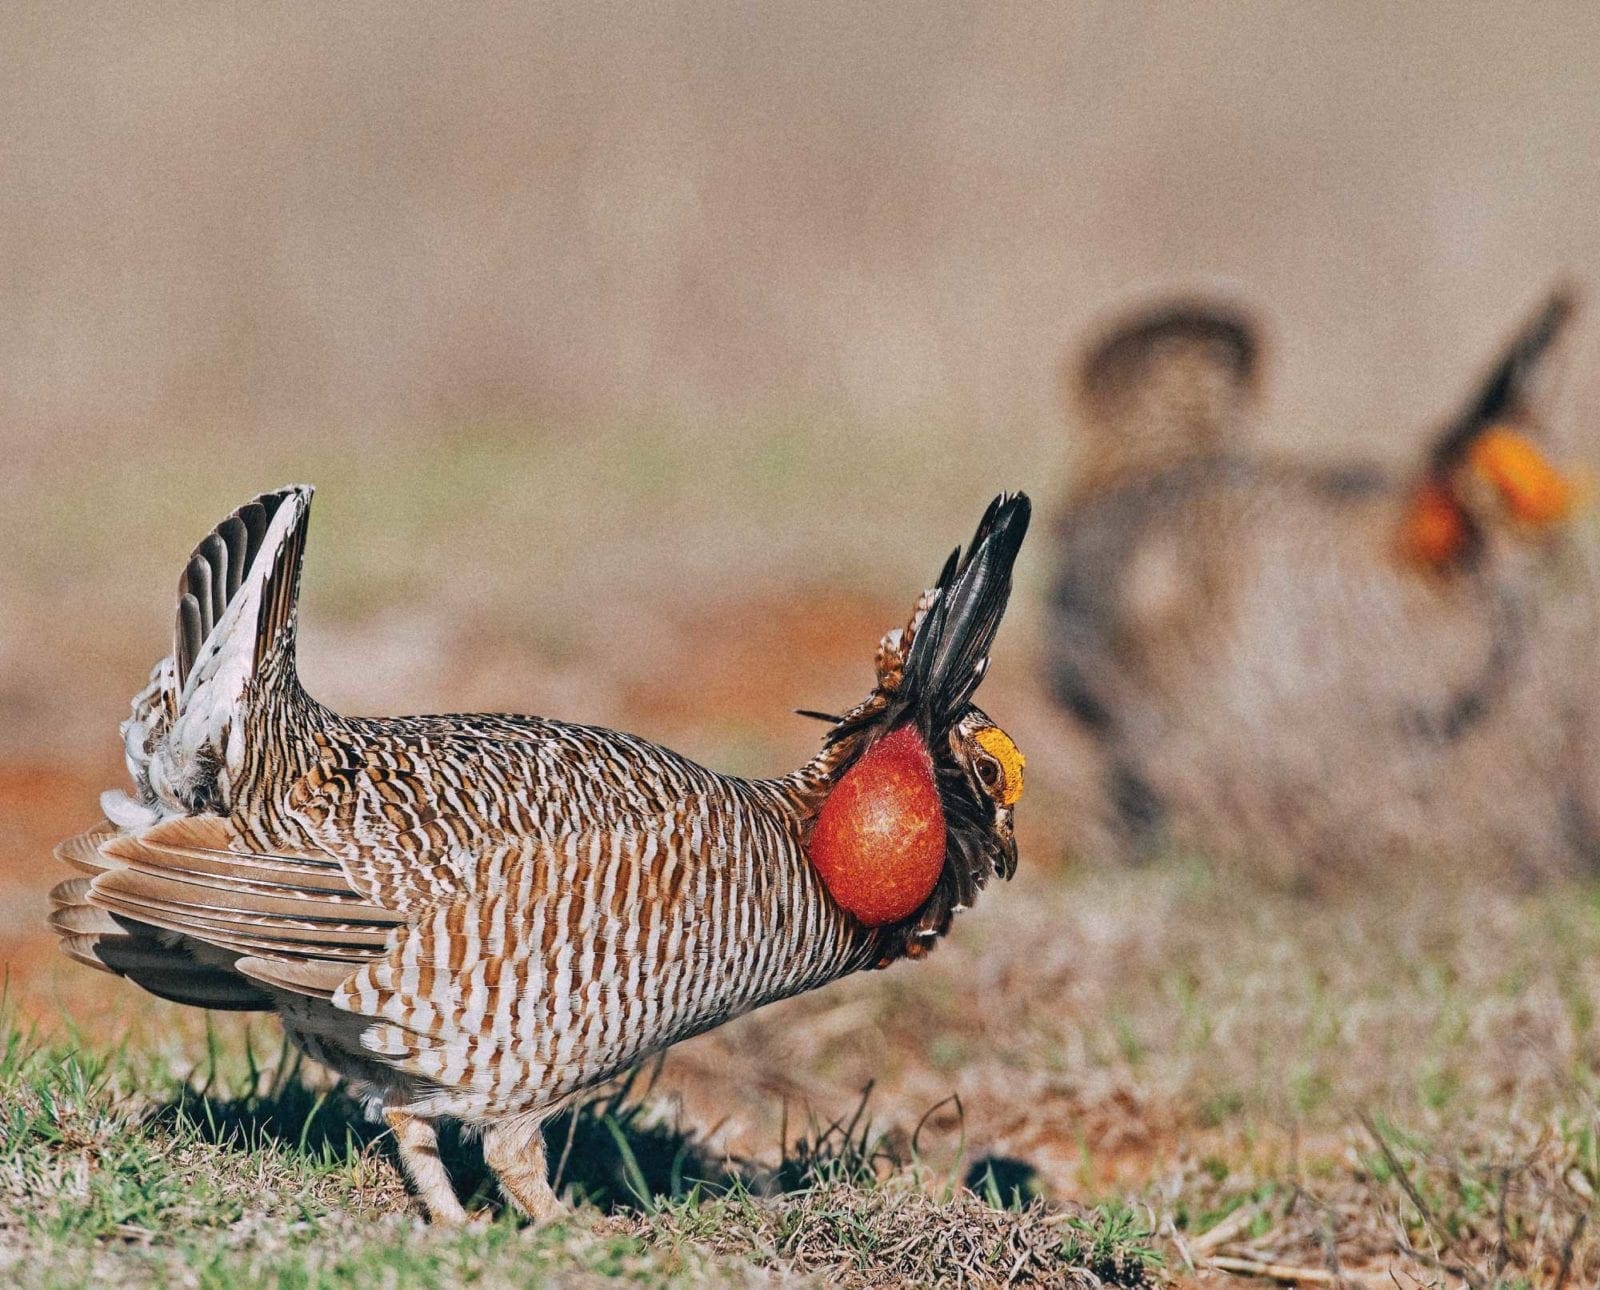 Private Land Management is a Key Issue in Lesser Prairie-Chicken Fight